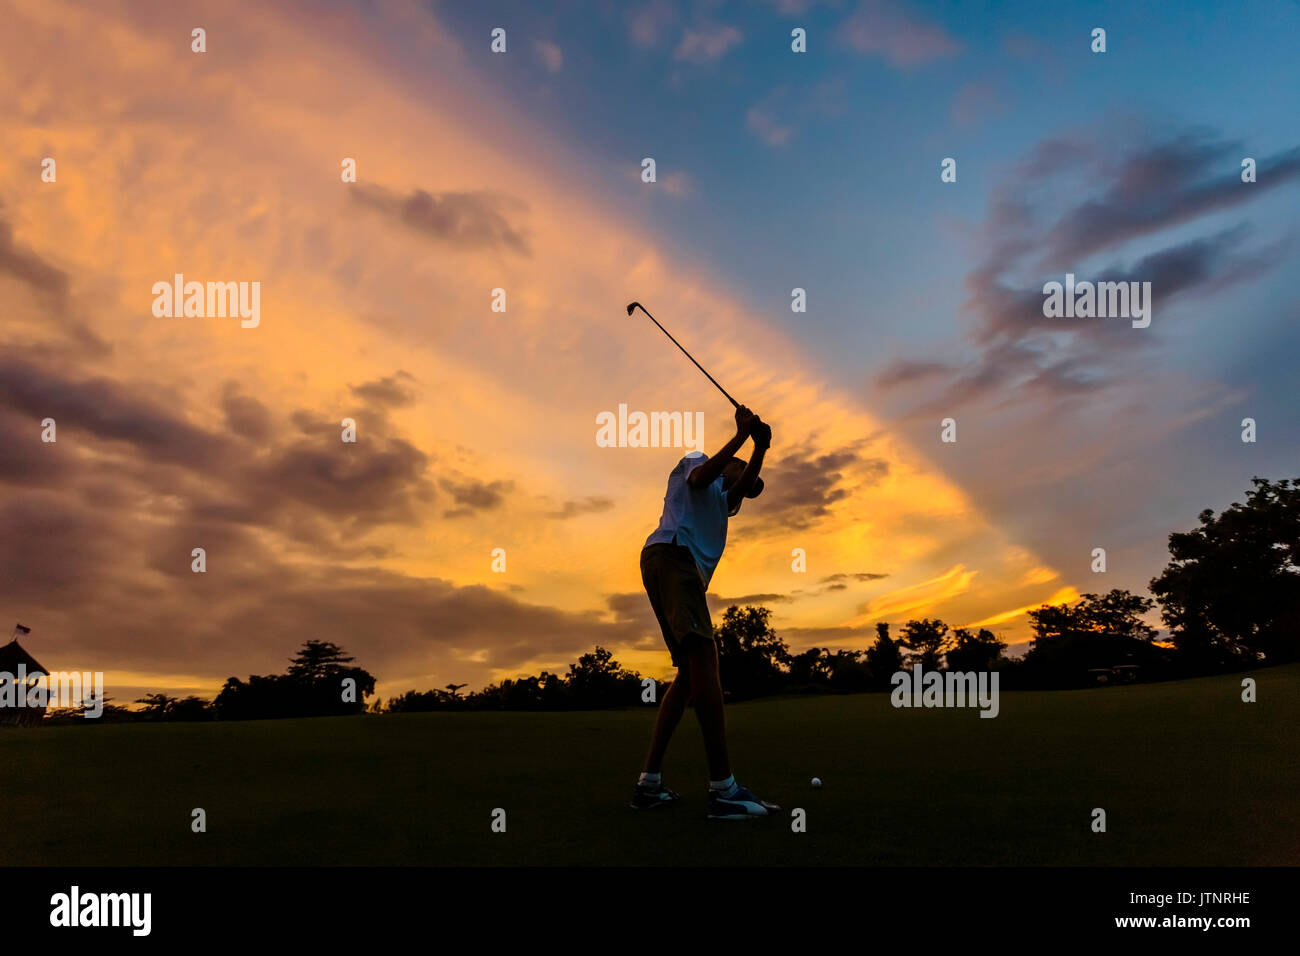 Golf player at sunset time,Bali,Indonesia Stock Photo